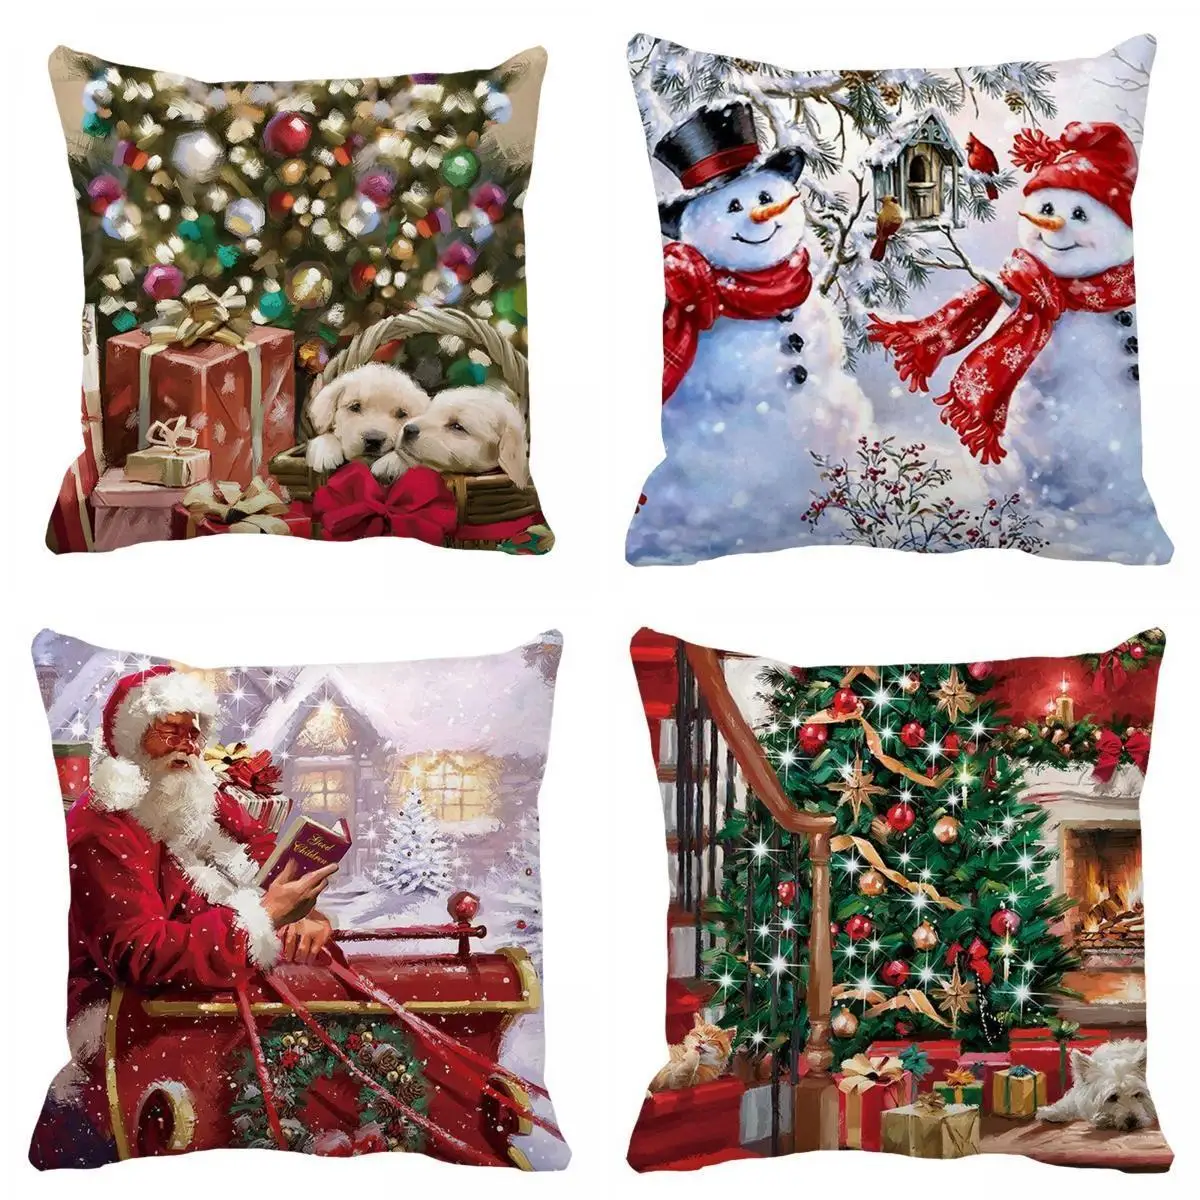 Christmas Pillow Cover Pillow Case 18x18 for Holiday Home Decoration